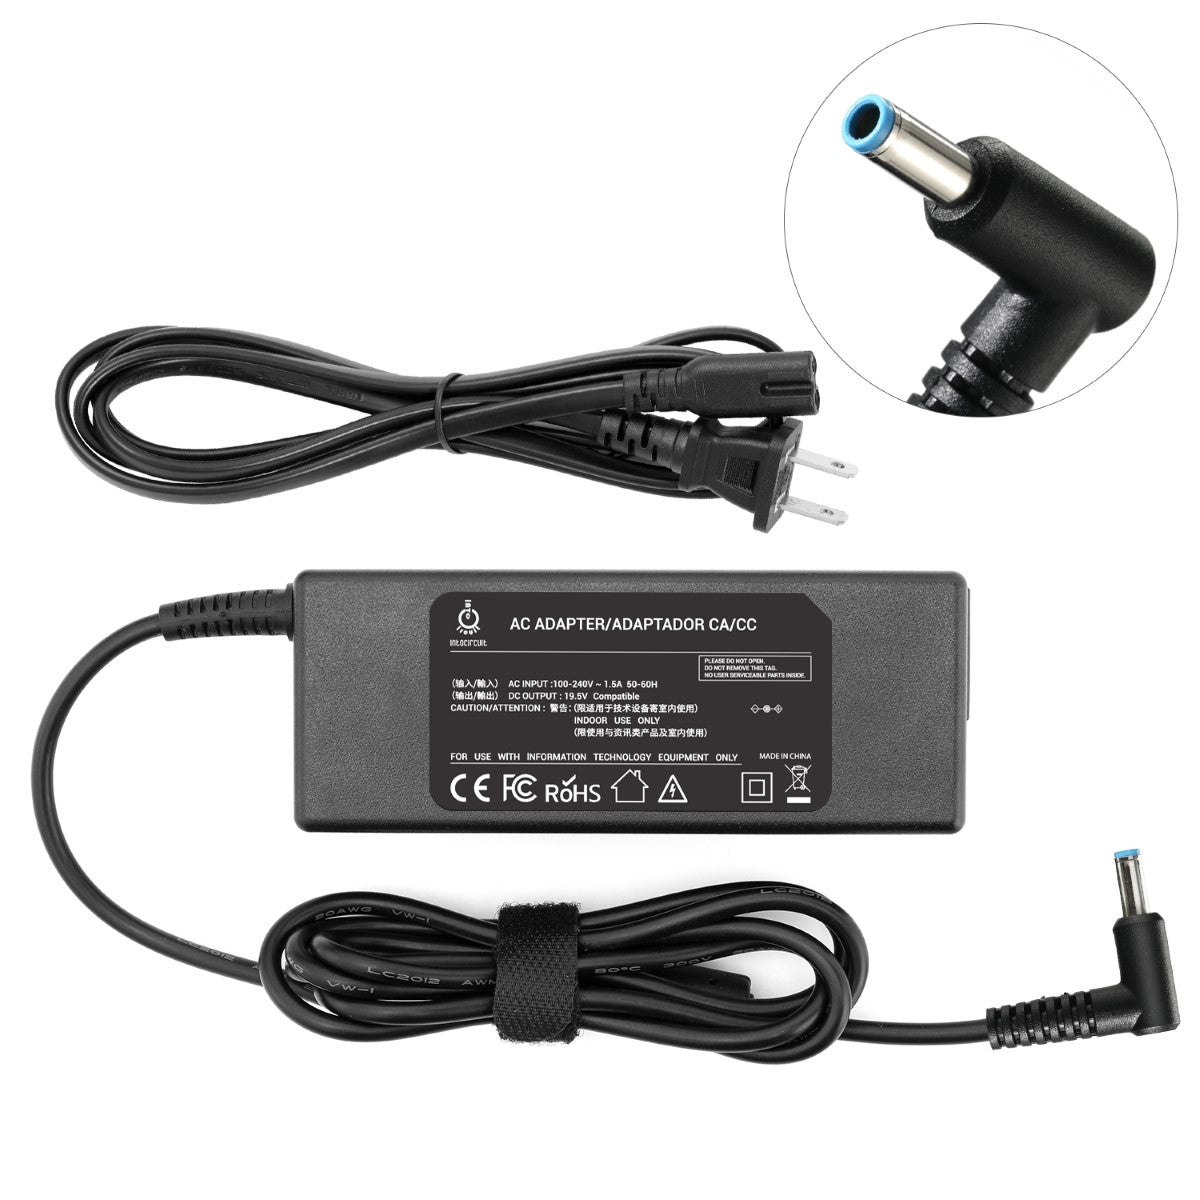 Charger for HP Envy Touchsmart 15t-j100 Notebook